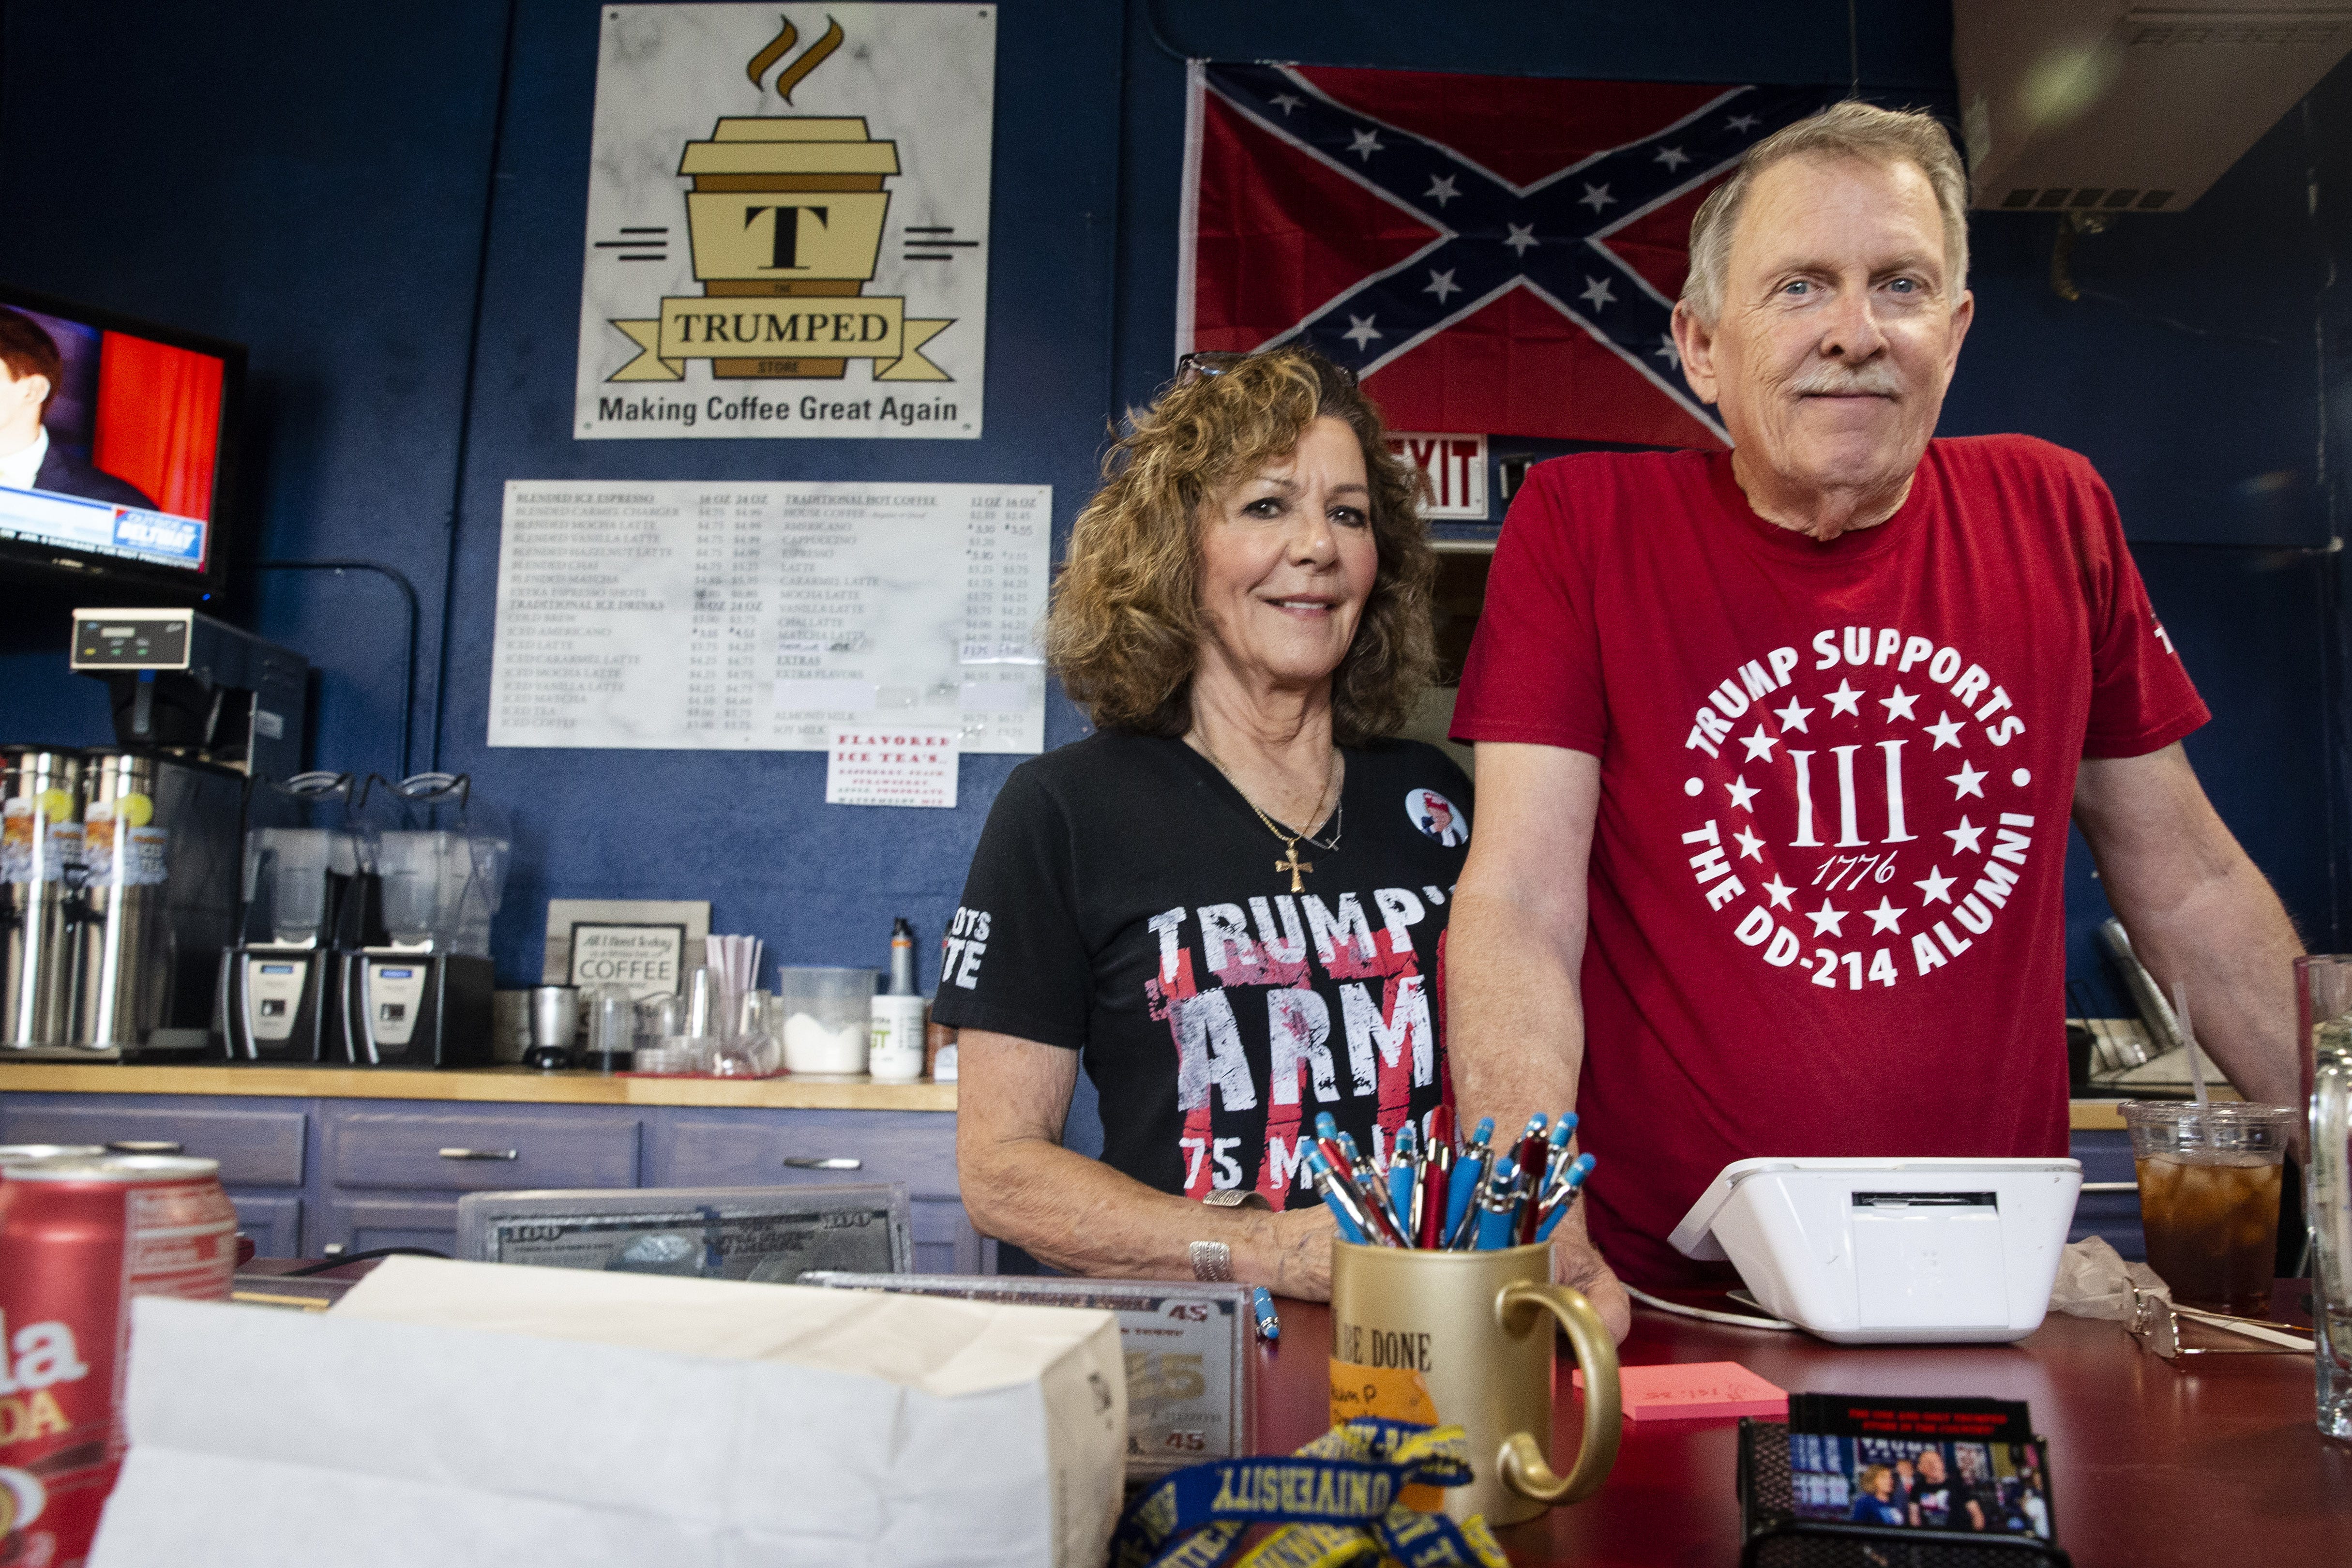 Husband and wife Steven and Karen Slaton, owners of The Trumped Store in Show Low, on July 9, 2021.